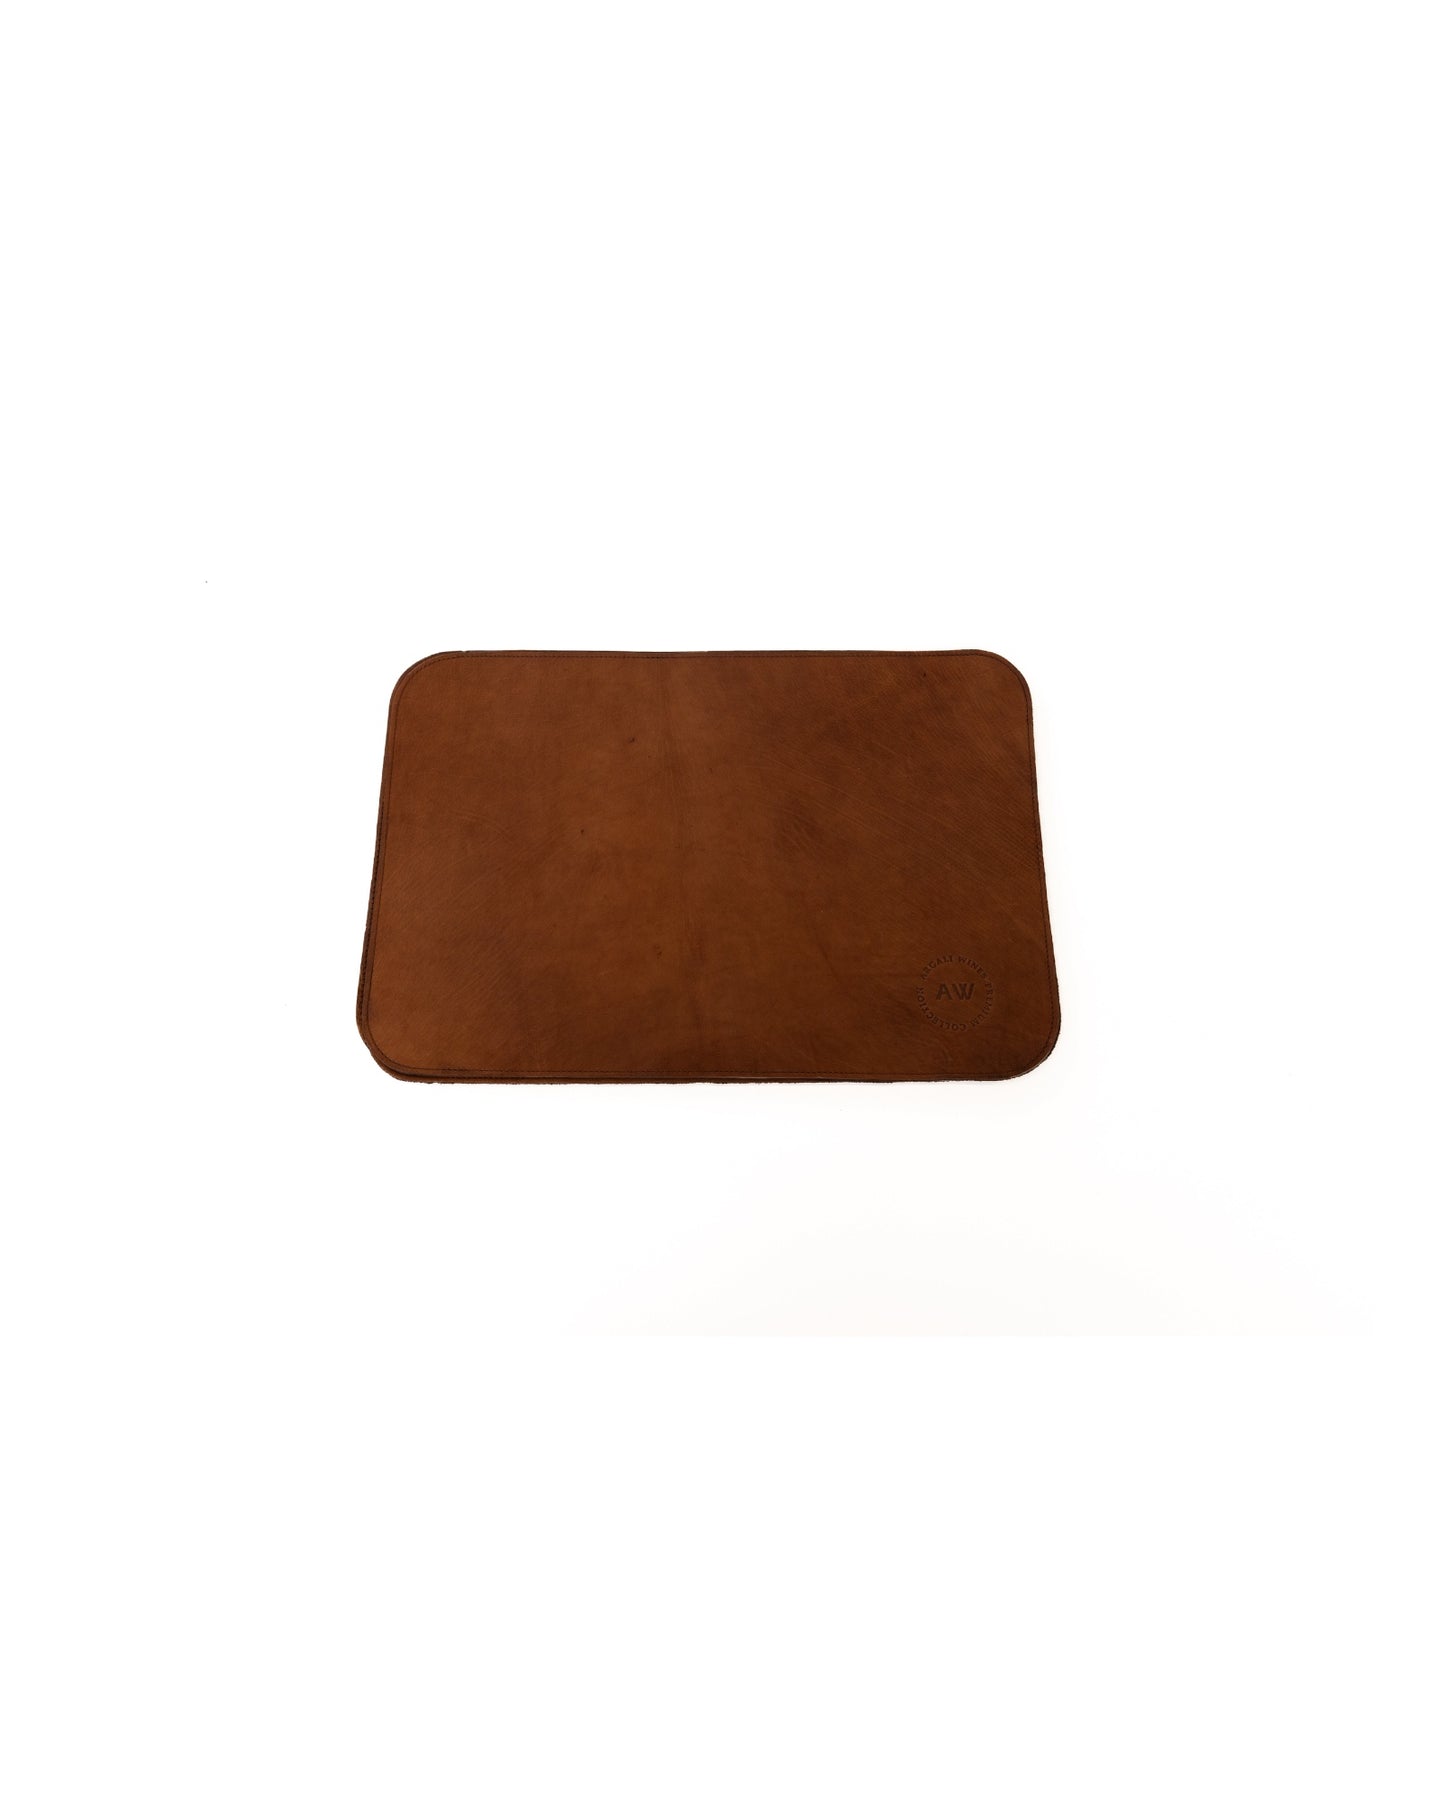 LEATHER PLACEMATS IN BROWN